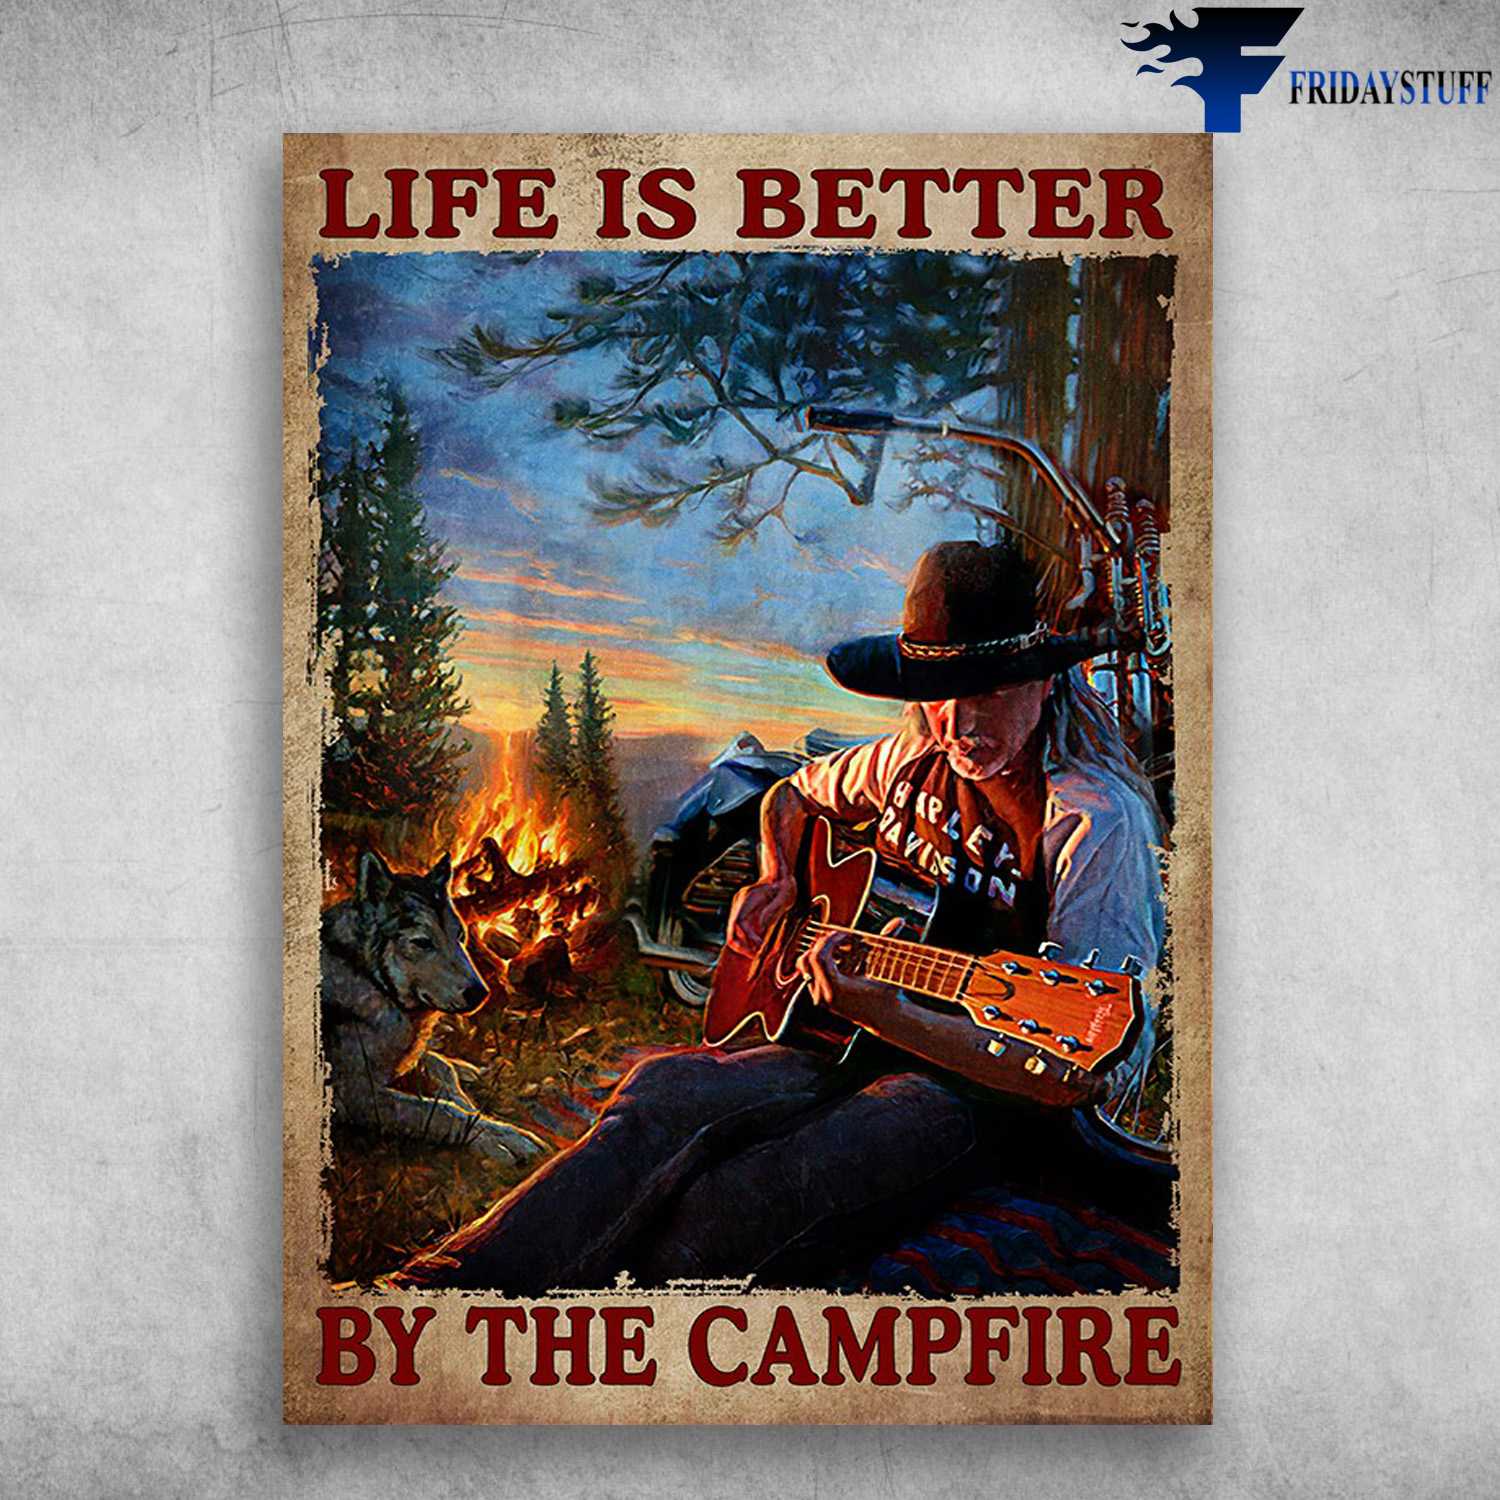 Camping With Dog, Guitar Old Man - Life Is Better, By The Campfire